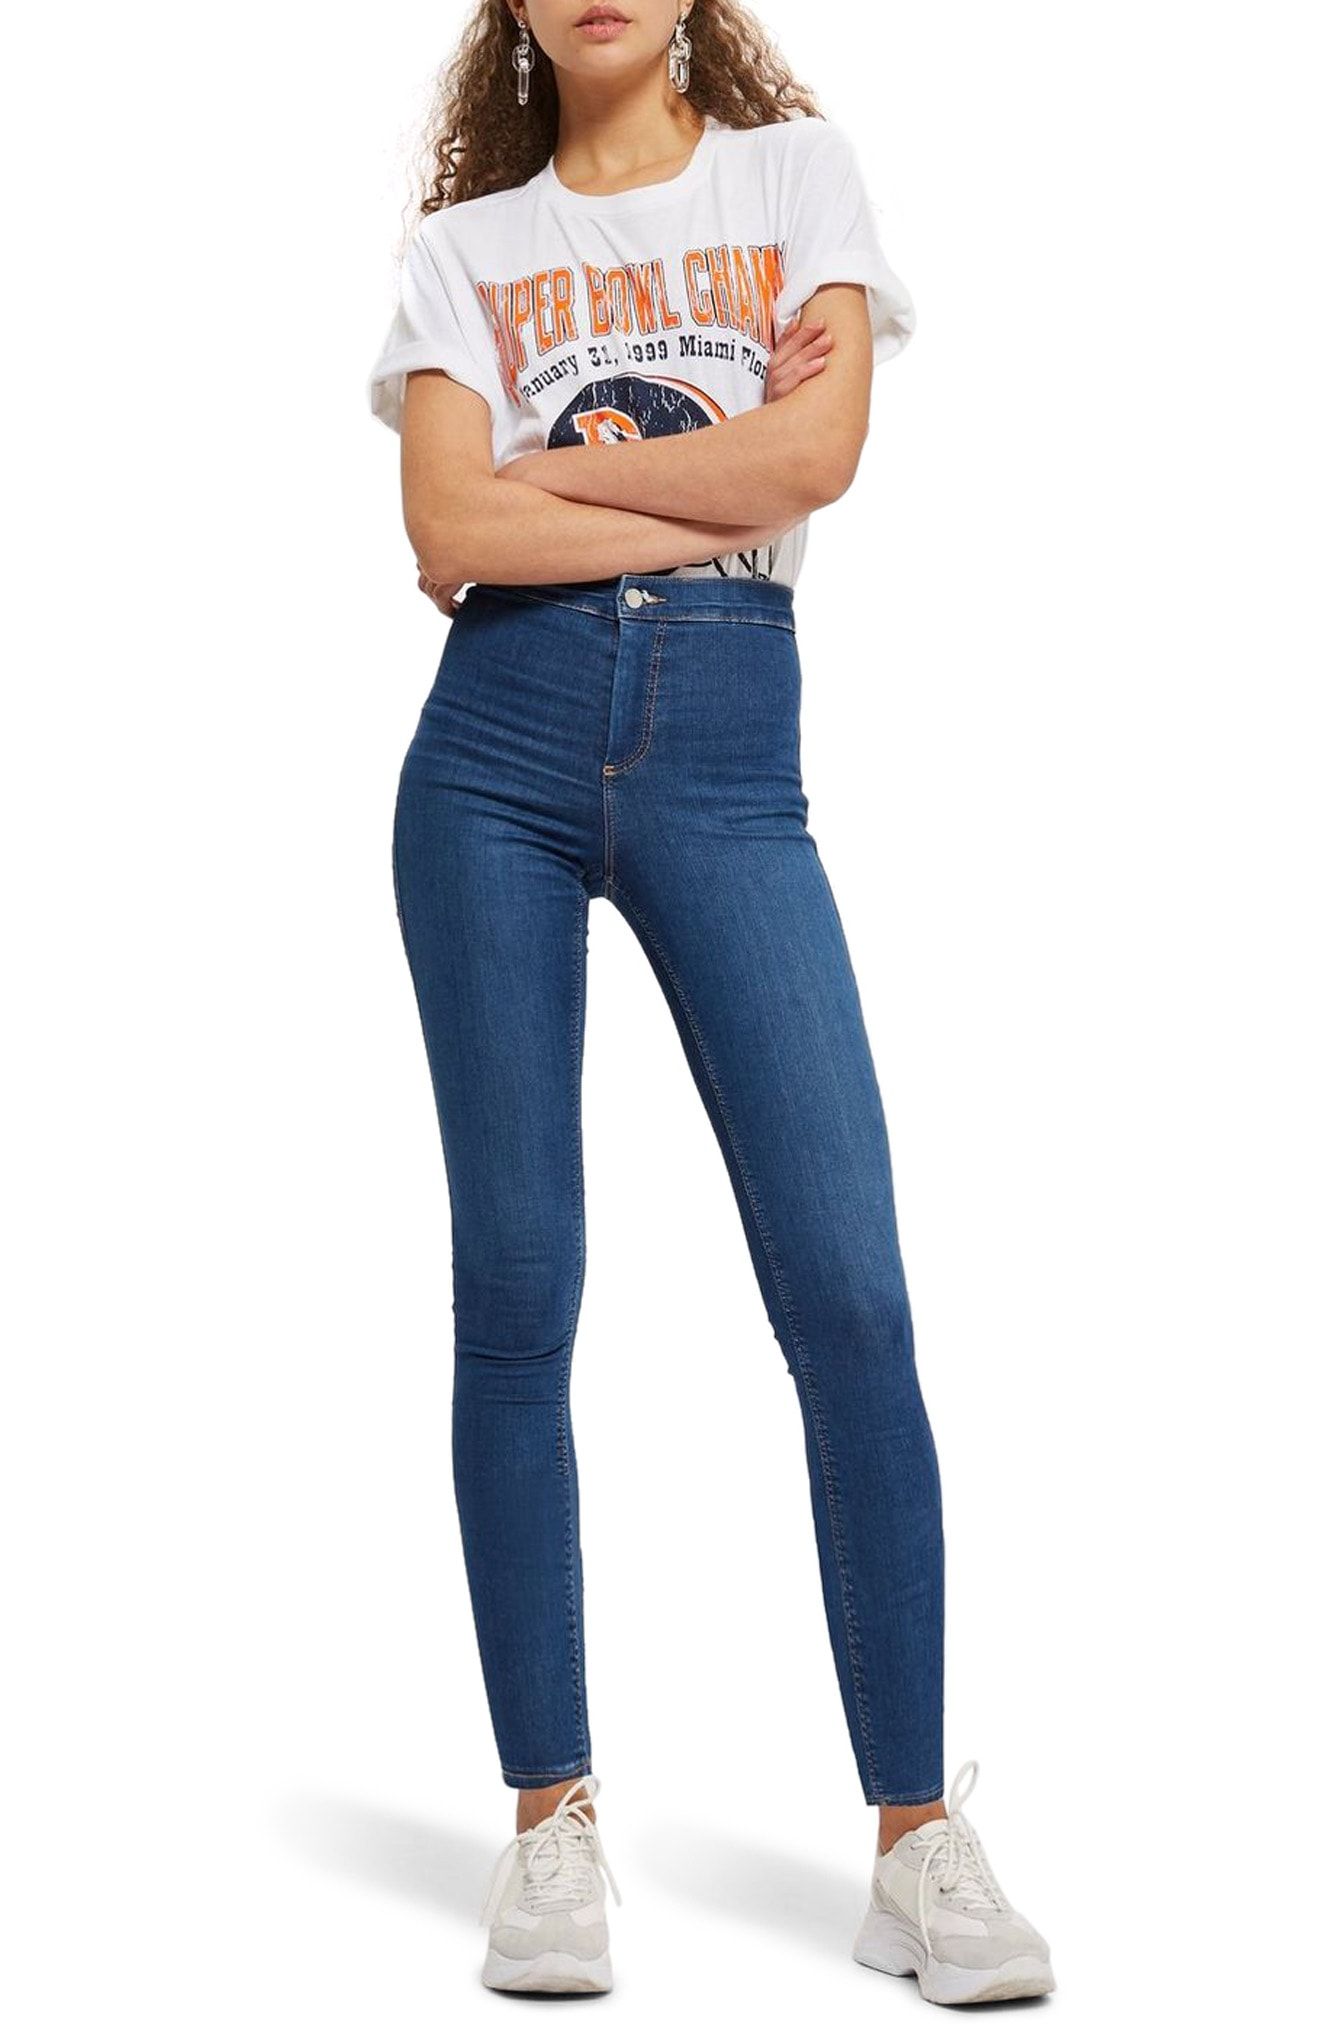 body type for high waisted jeans